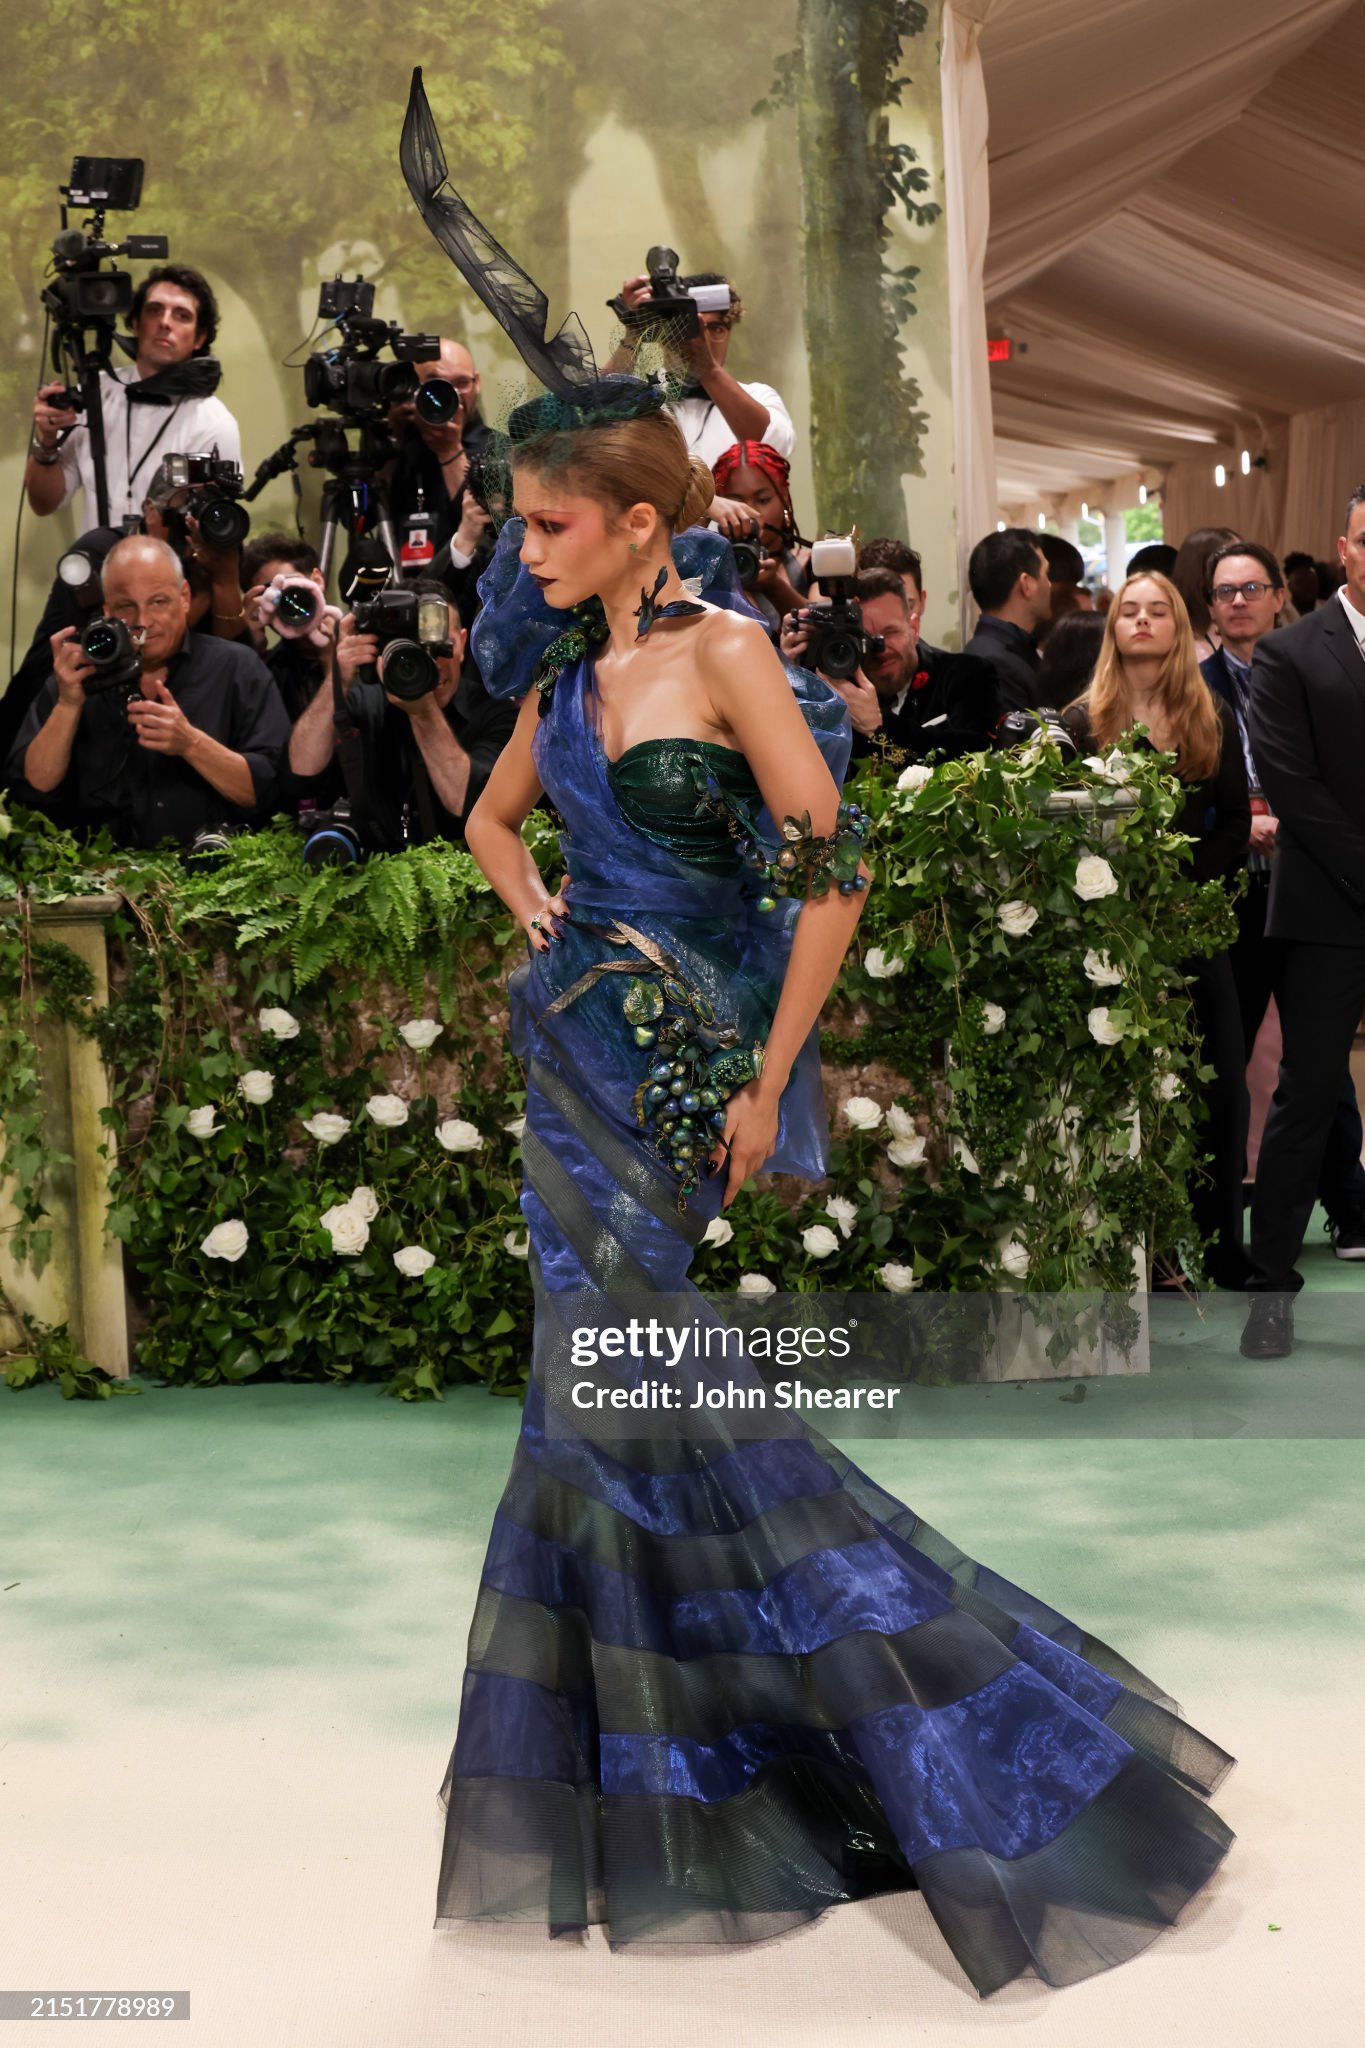 gettyimages-2151778989-2048x2048.jpg